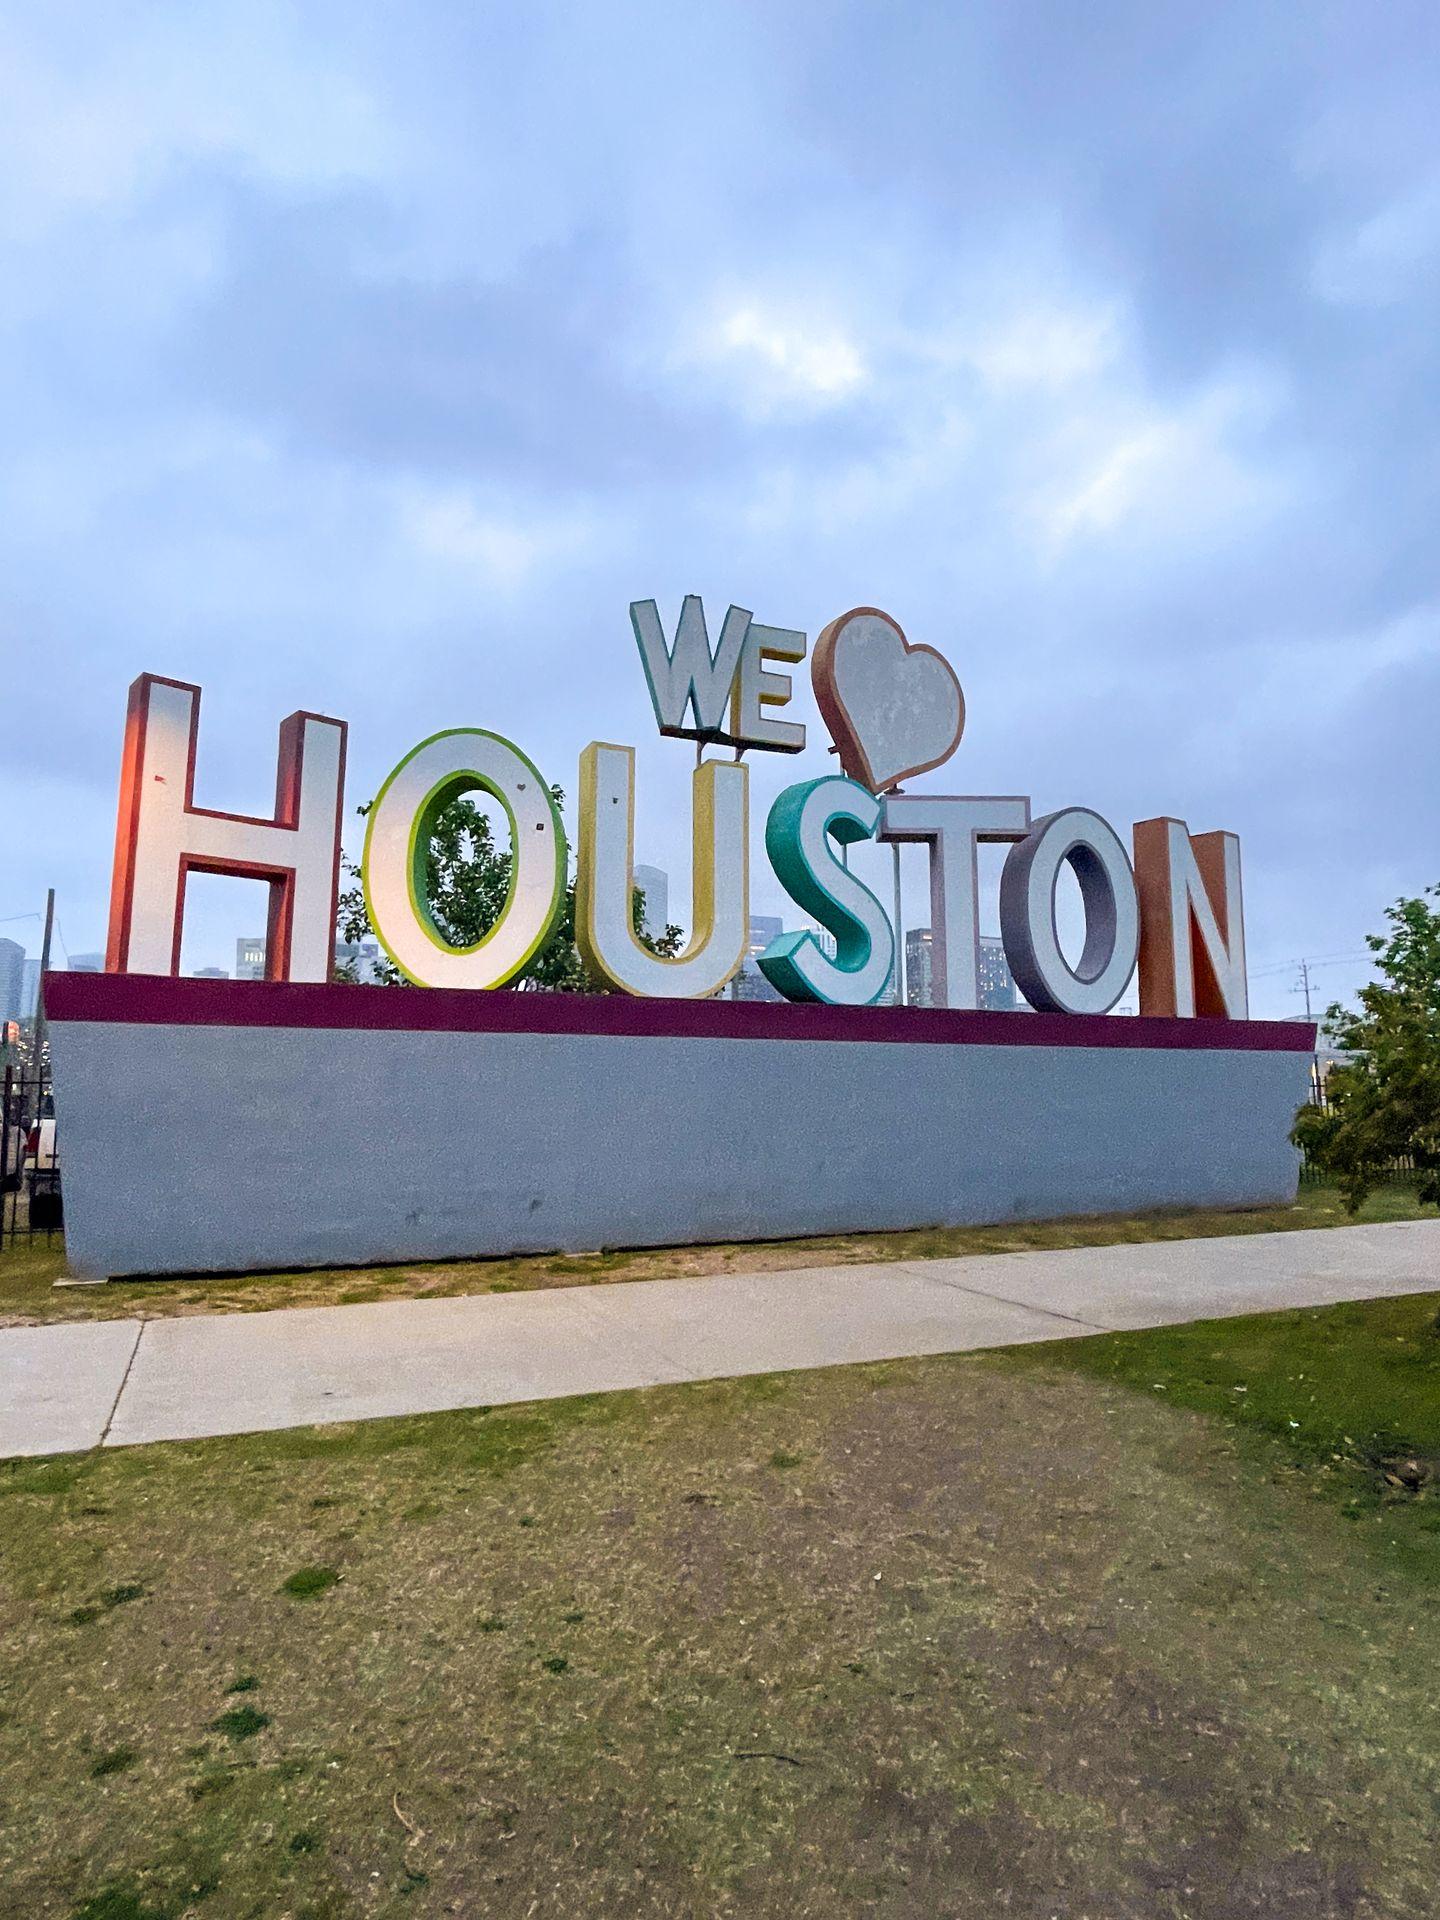 A colorful sculpture that reads 'We Heart Houston'